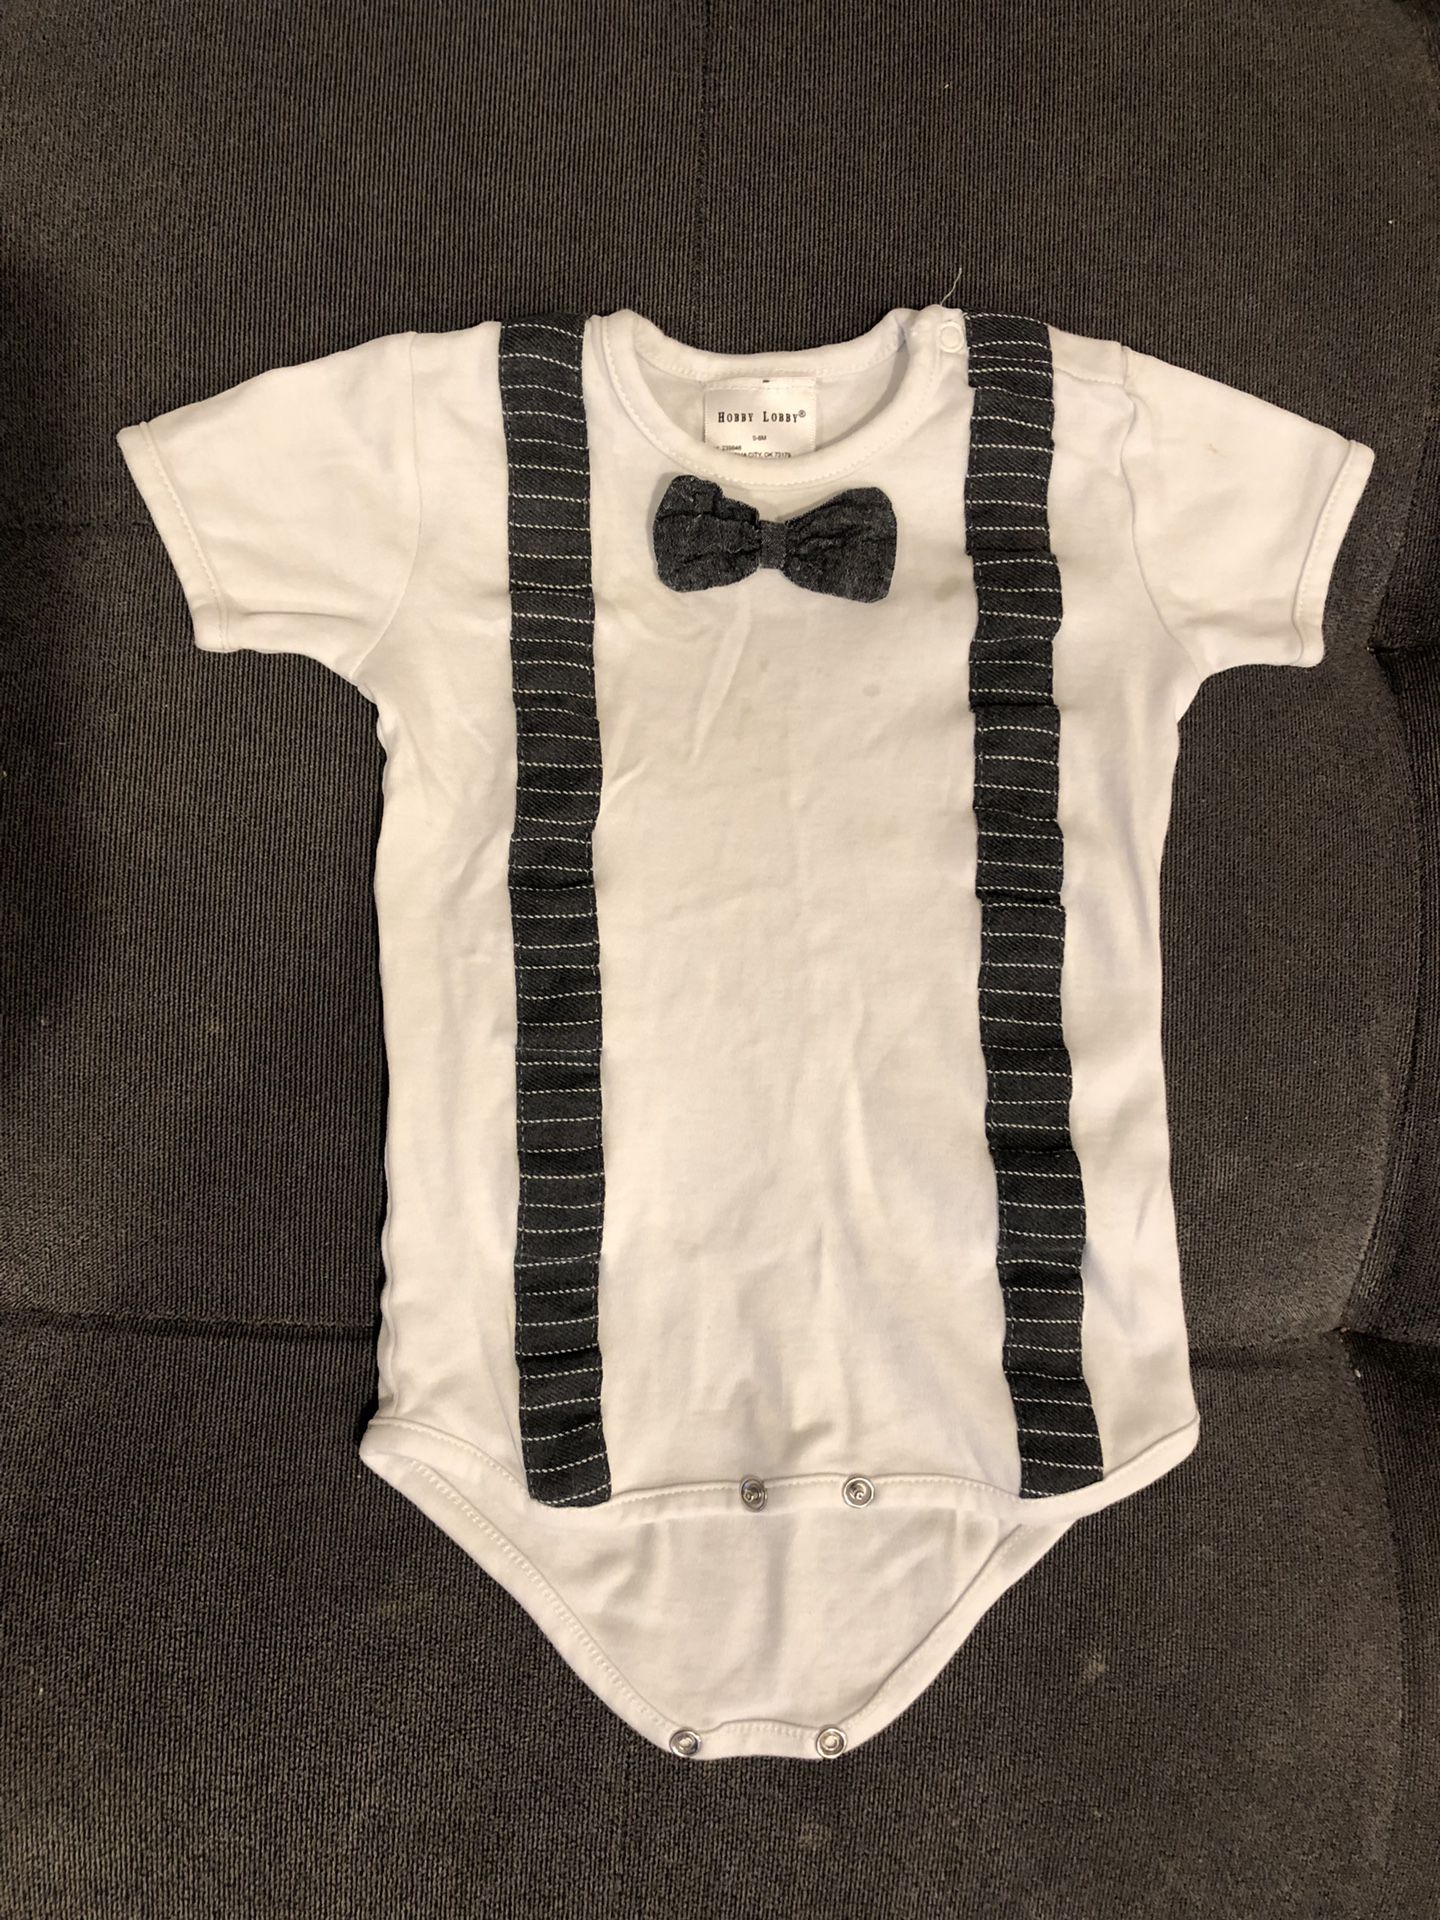 3-6 months baby clothes